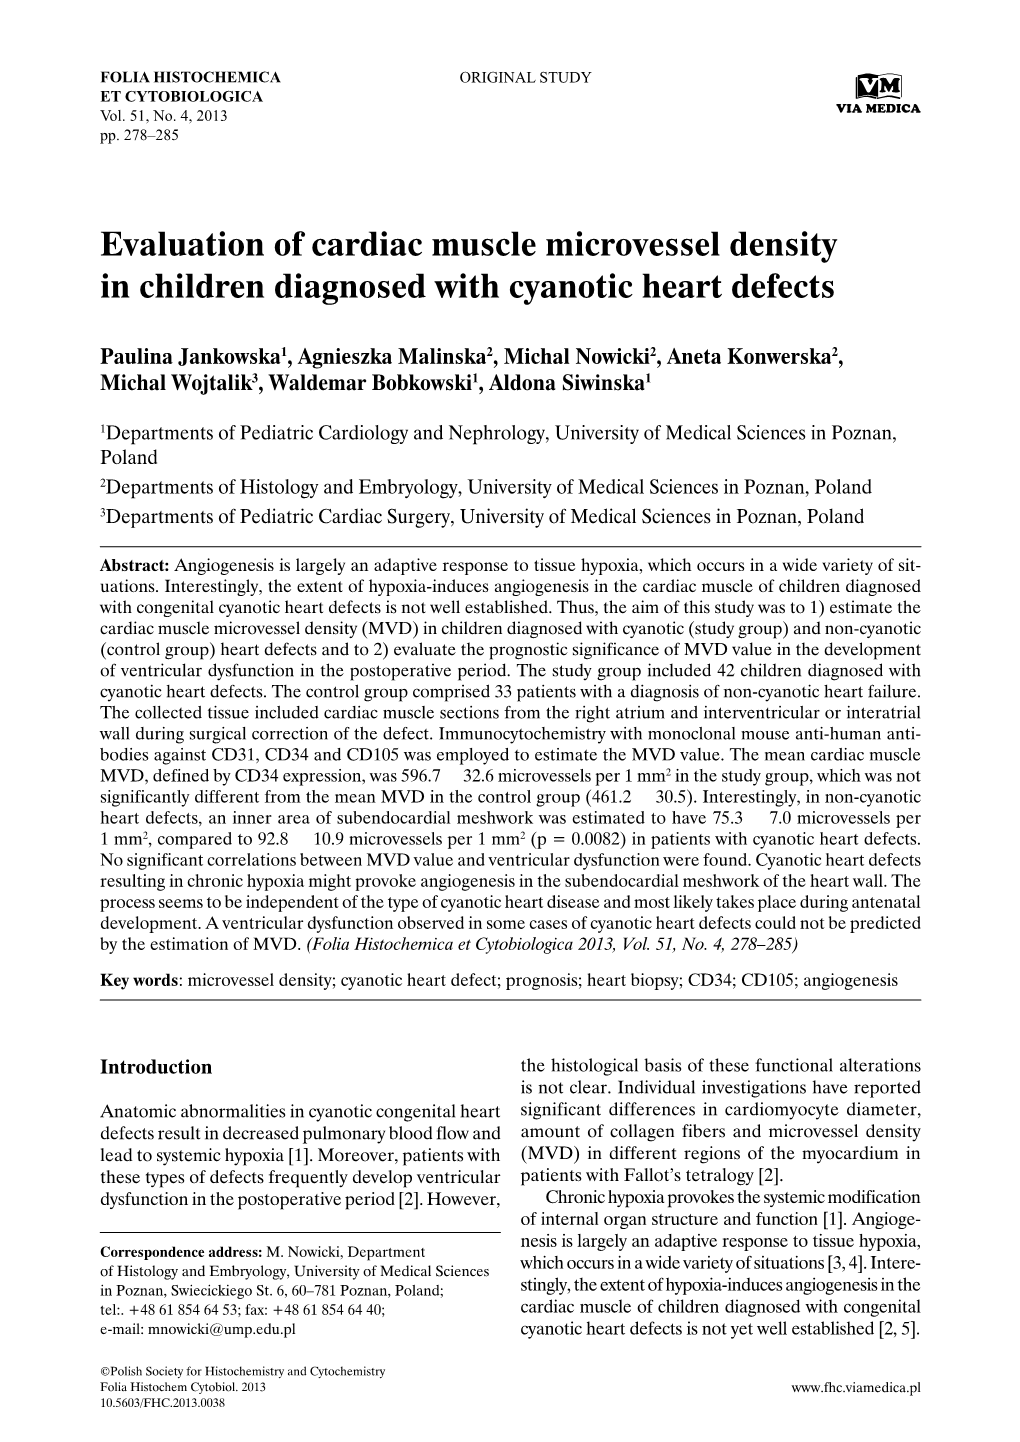 Evaluation of Cardiac Muscle Microvessel Density in Children Diagnosed with Cyanotic Heart Defects